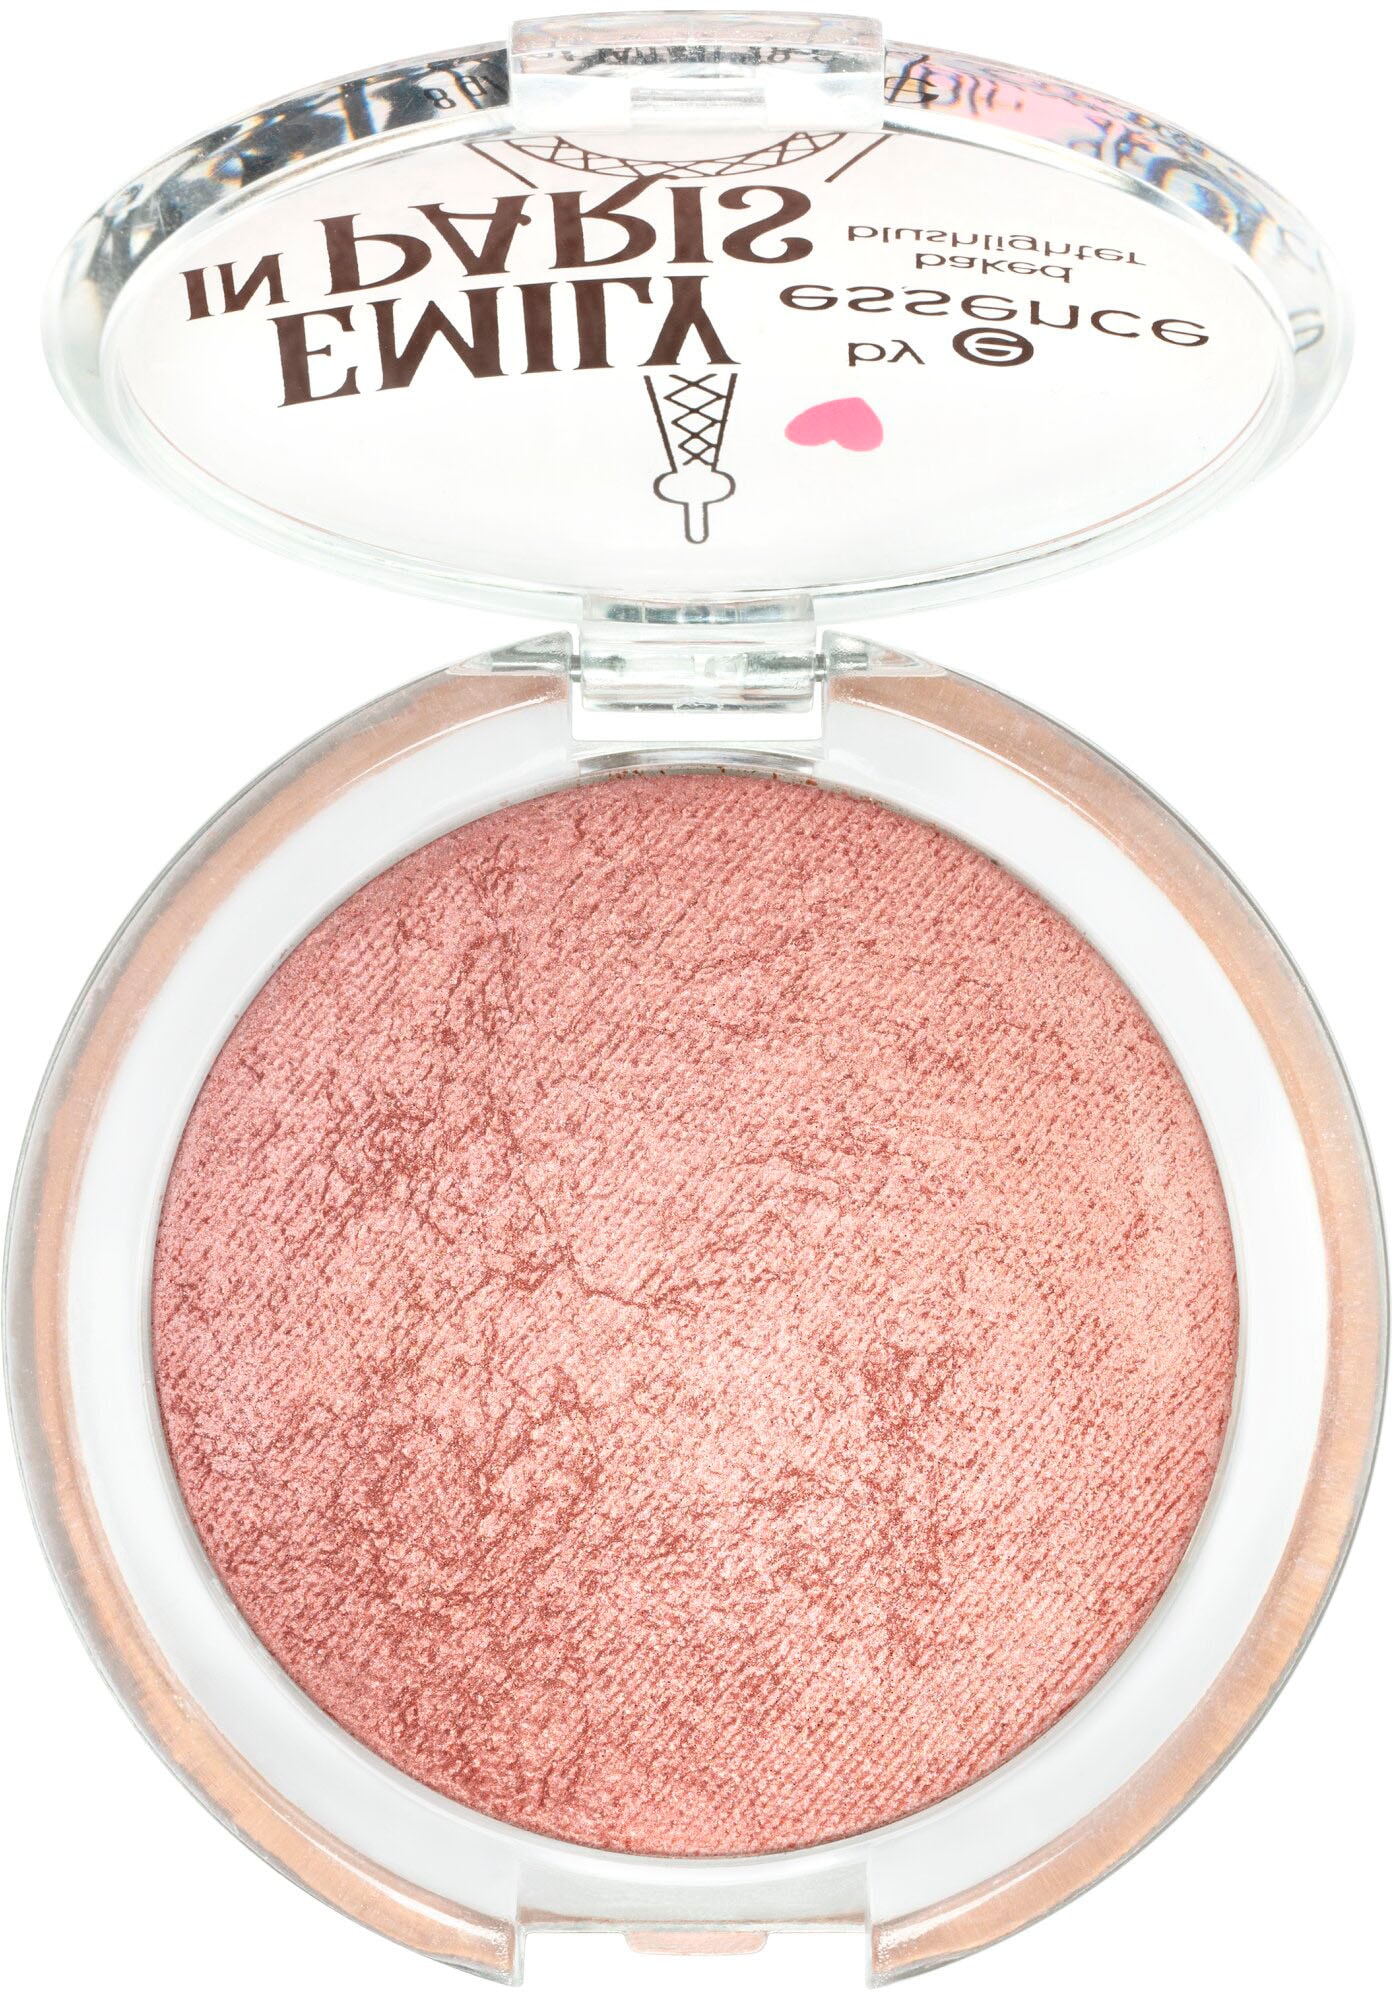 blushlighter« »EMILY Essence by bei IN Rouge baked essence PARIS online